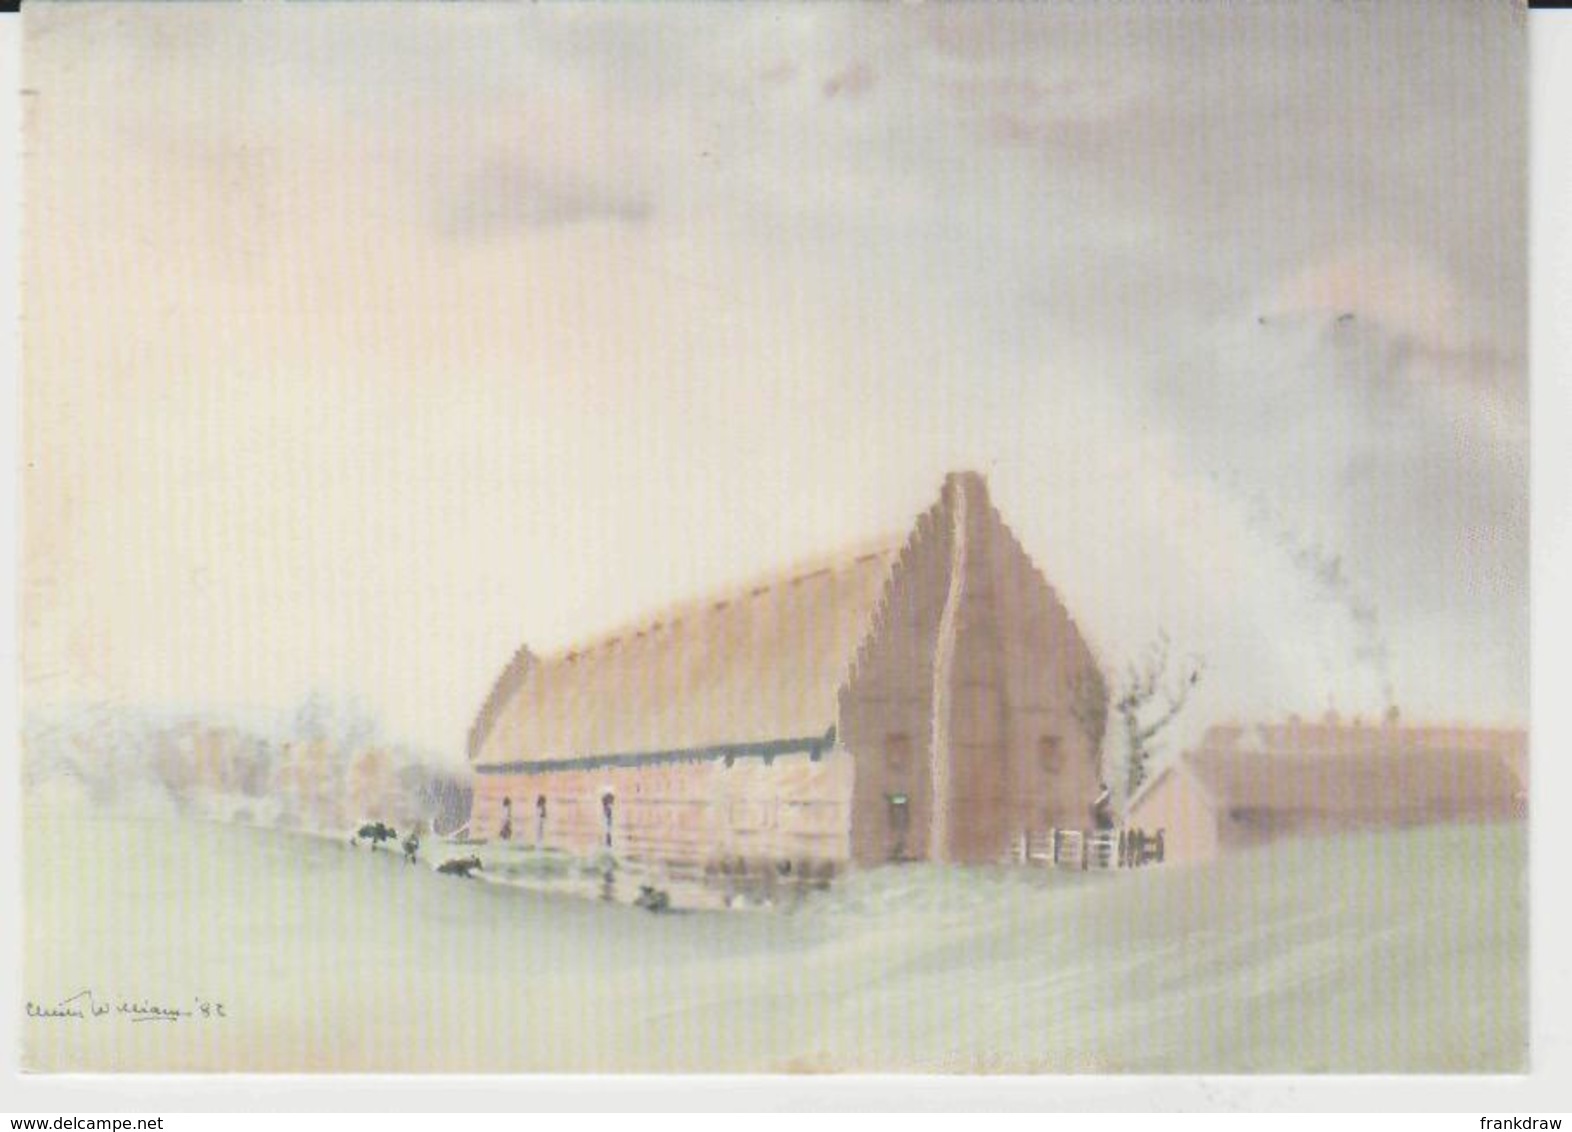 Postcard - The Great Barn, Hales Hall, Loddon - Norfolk - Posted 11th Aug 1986  Very Good - Unclassified